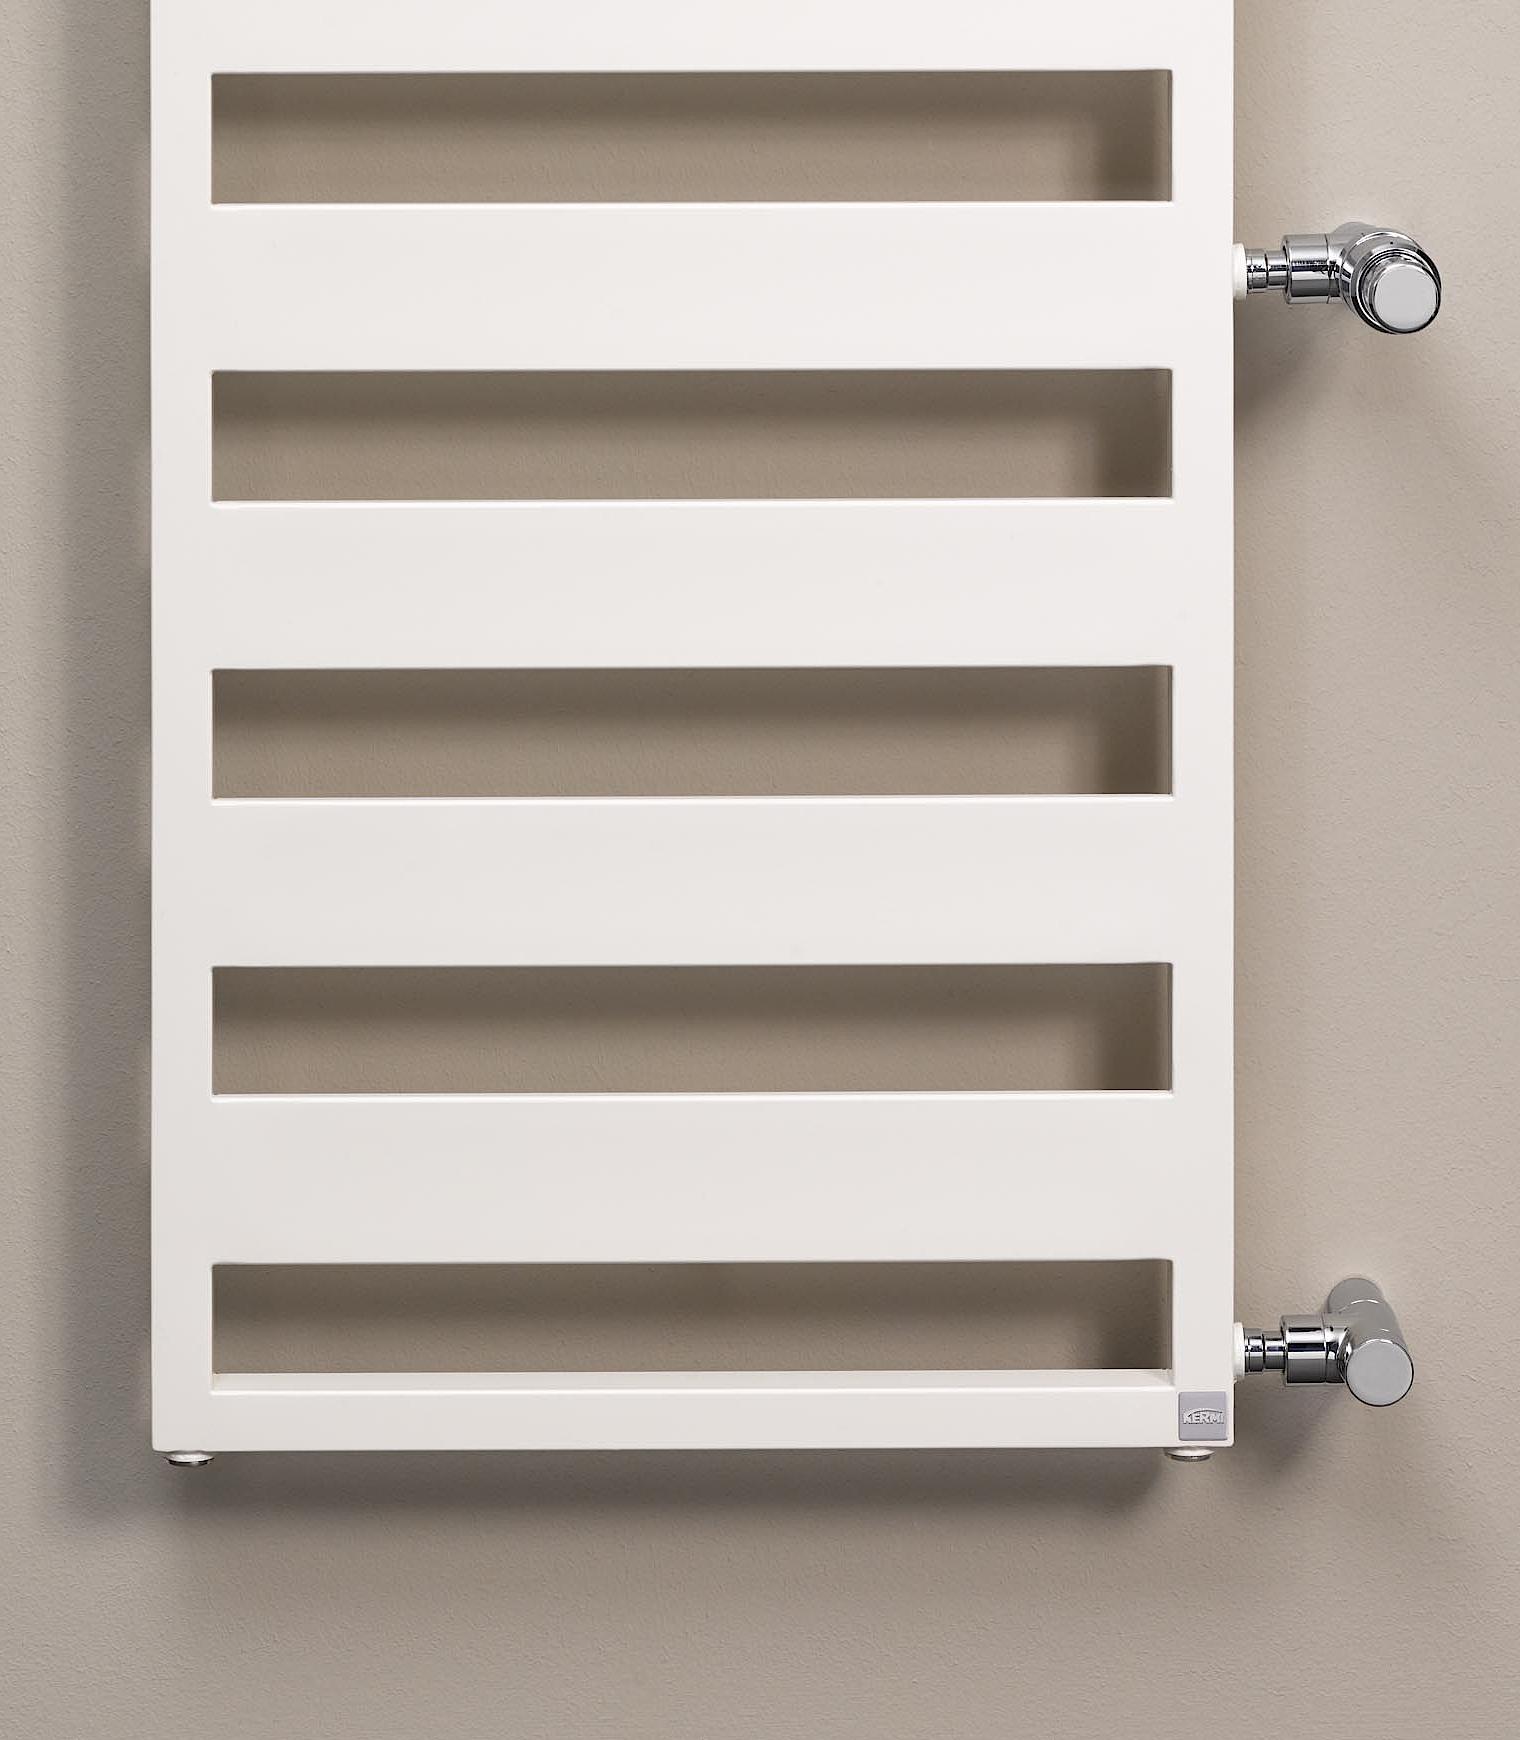 The Kermi Casteo design and bathroom radiator offers a fast and efficient replacement solution for modernisation projects.